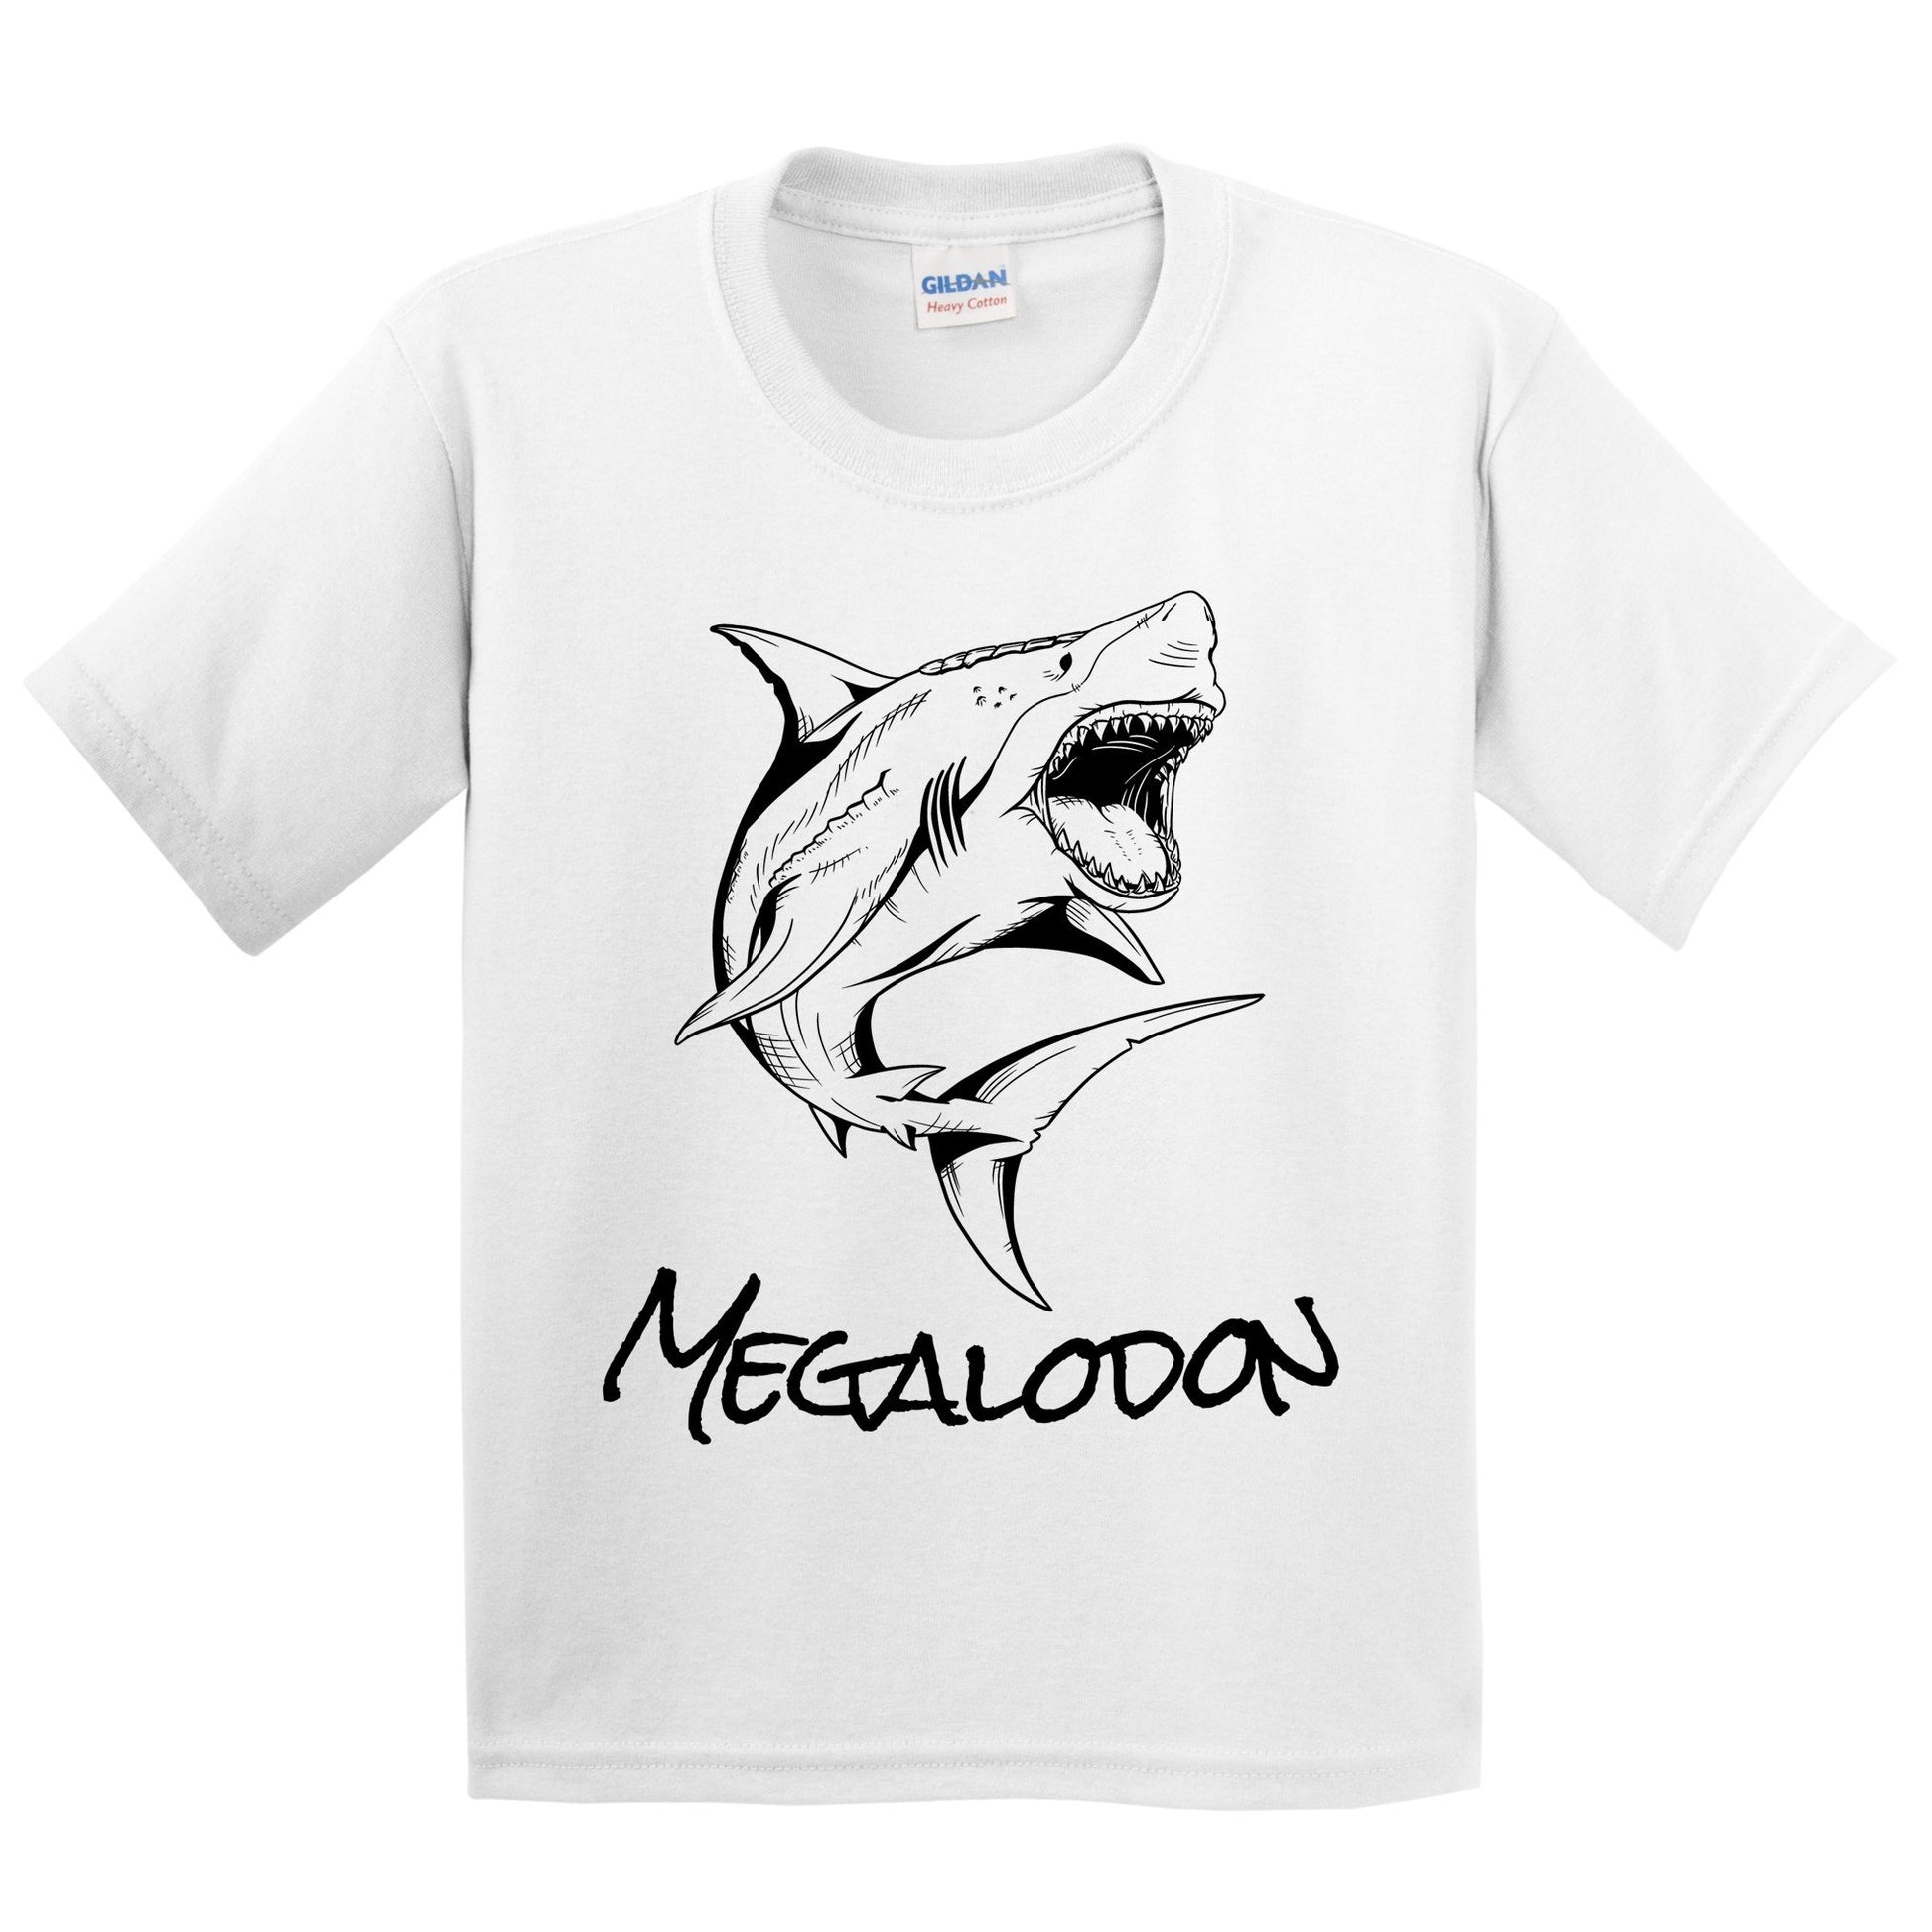 Megalodon Sketch Cool Ancient Giant Shark Kids Youth T-Shirt